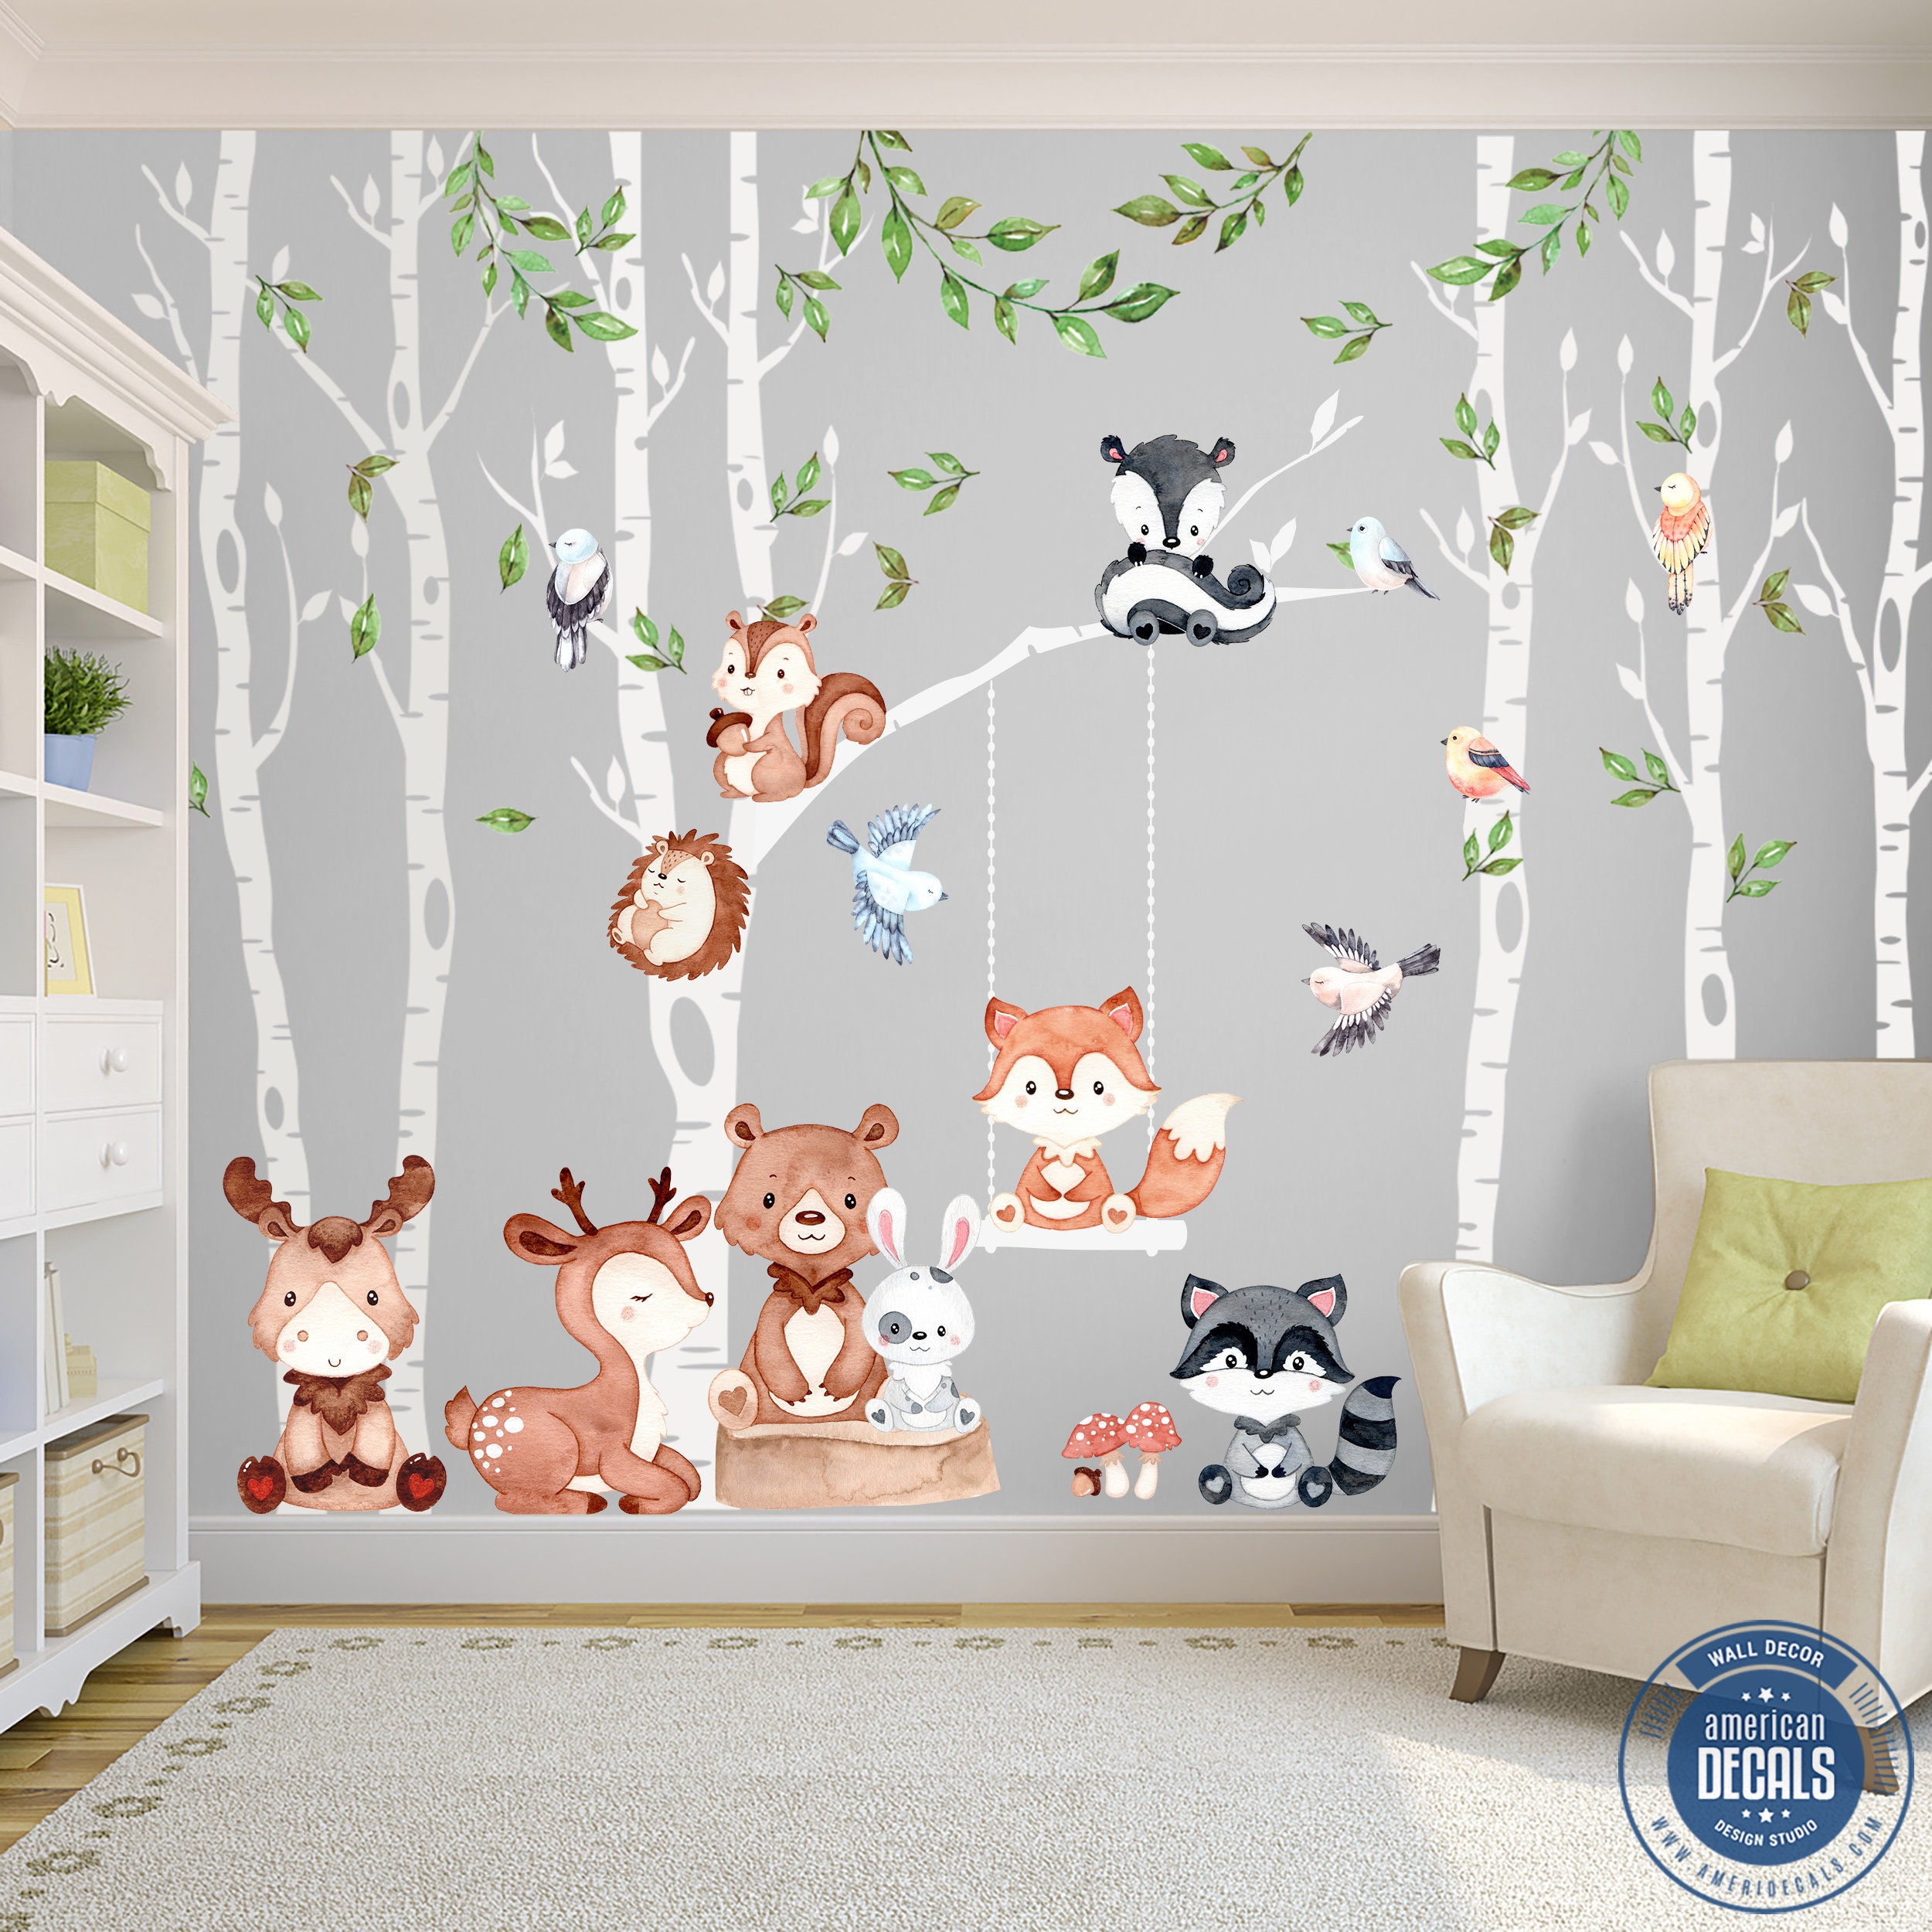 Woodland Theme Kids Room Wall Decal Fabric, Room Mural, Nursery Decal,  Forest Animal Decals, Fox, Bear, Bunny, Fawn, Pine Tree Wall Stickers - Etsy